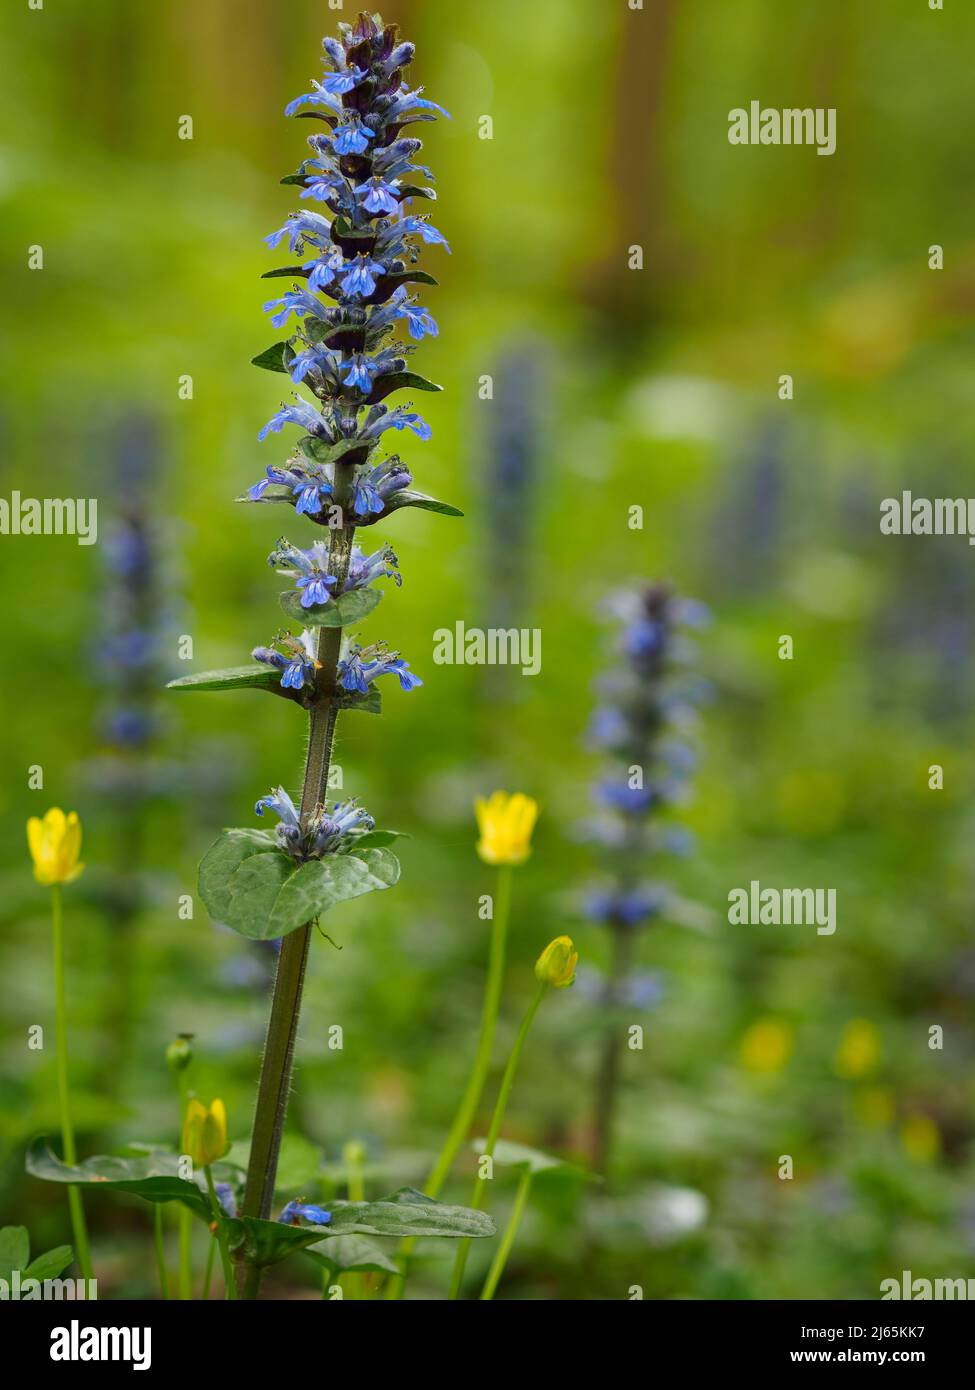 Ajuga reptans is a herbaceous flowering plant of the mint family and has a whole host of common names including brown bugle and carpetweed. Stock Photo